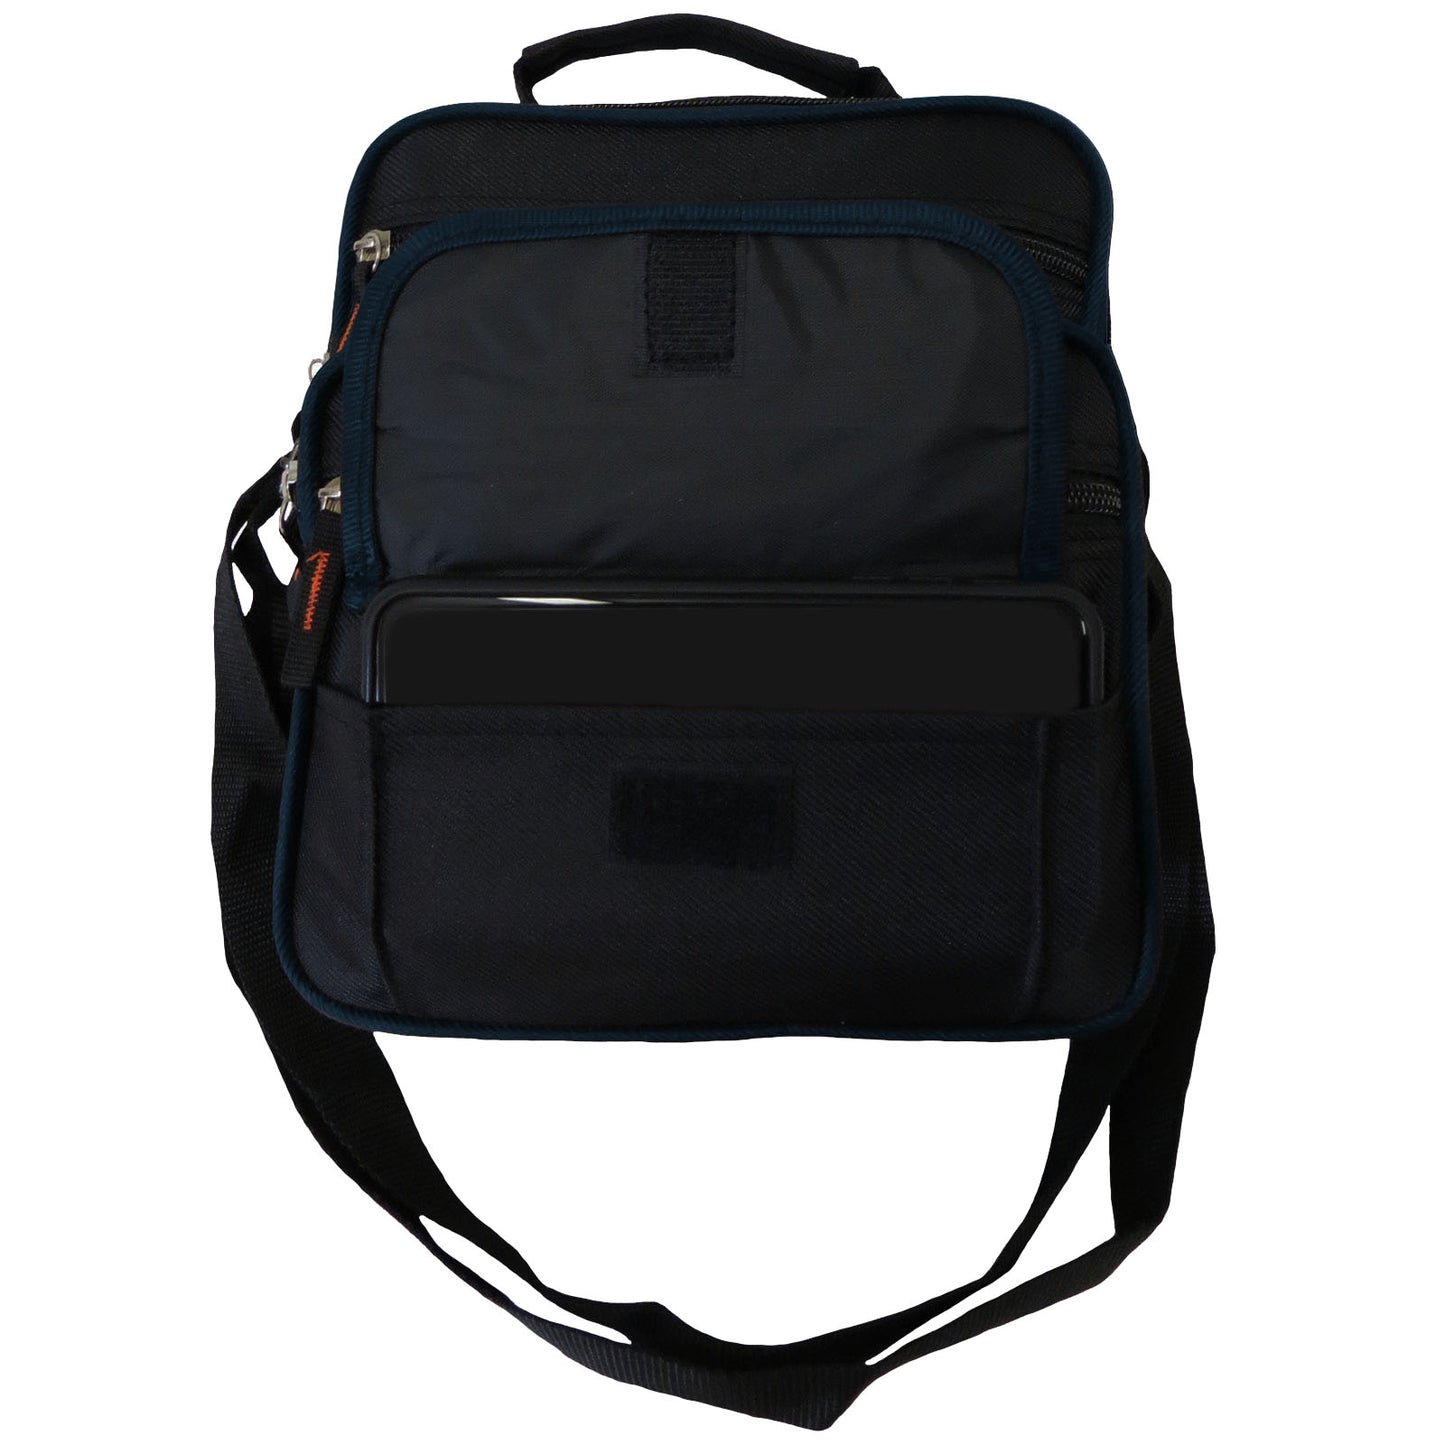 wholesale messenger bag in black with blue trim for travel or casual wear